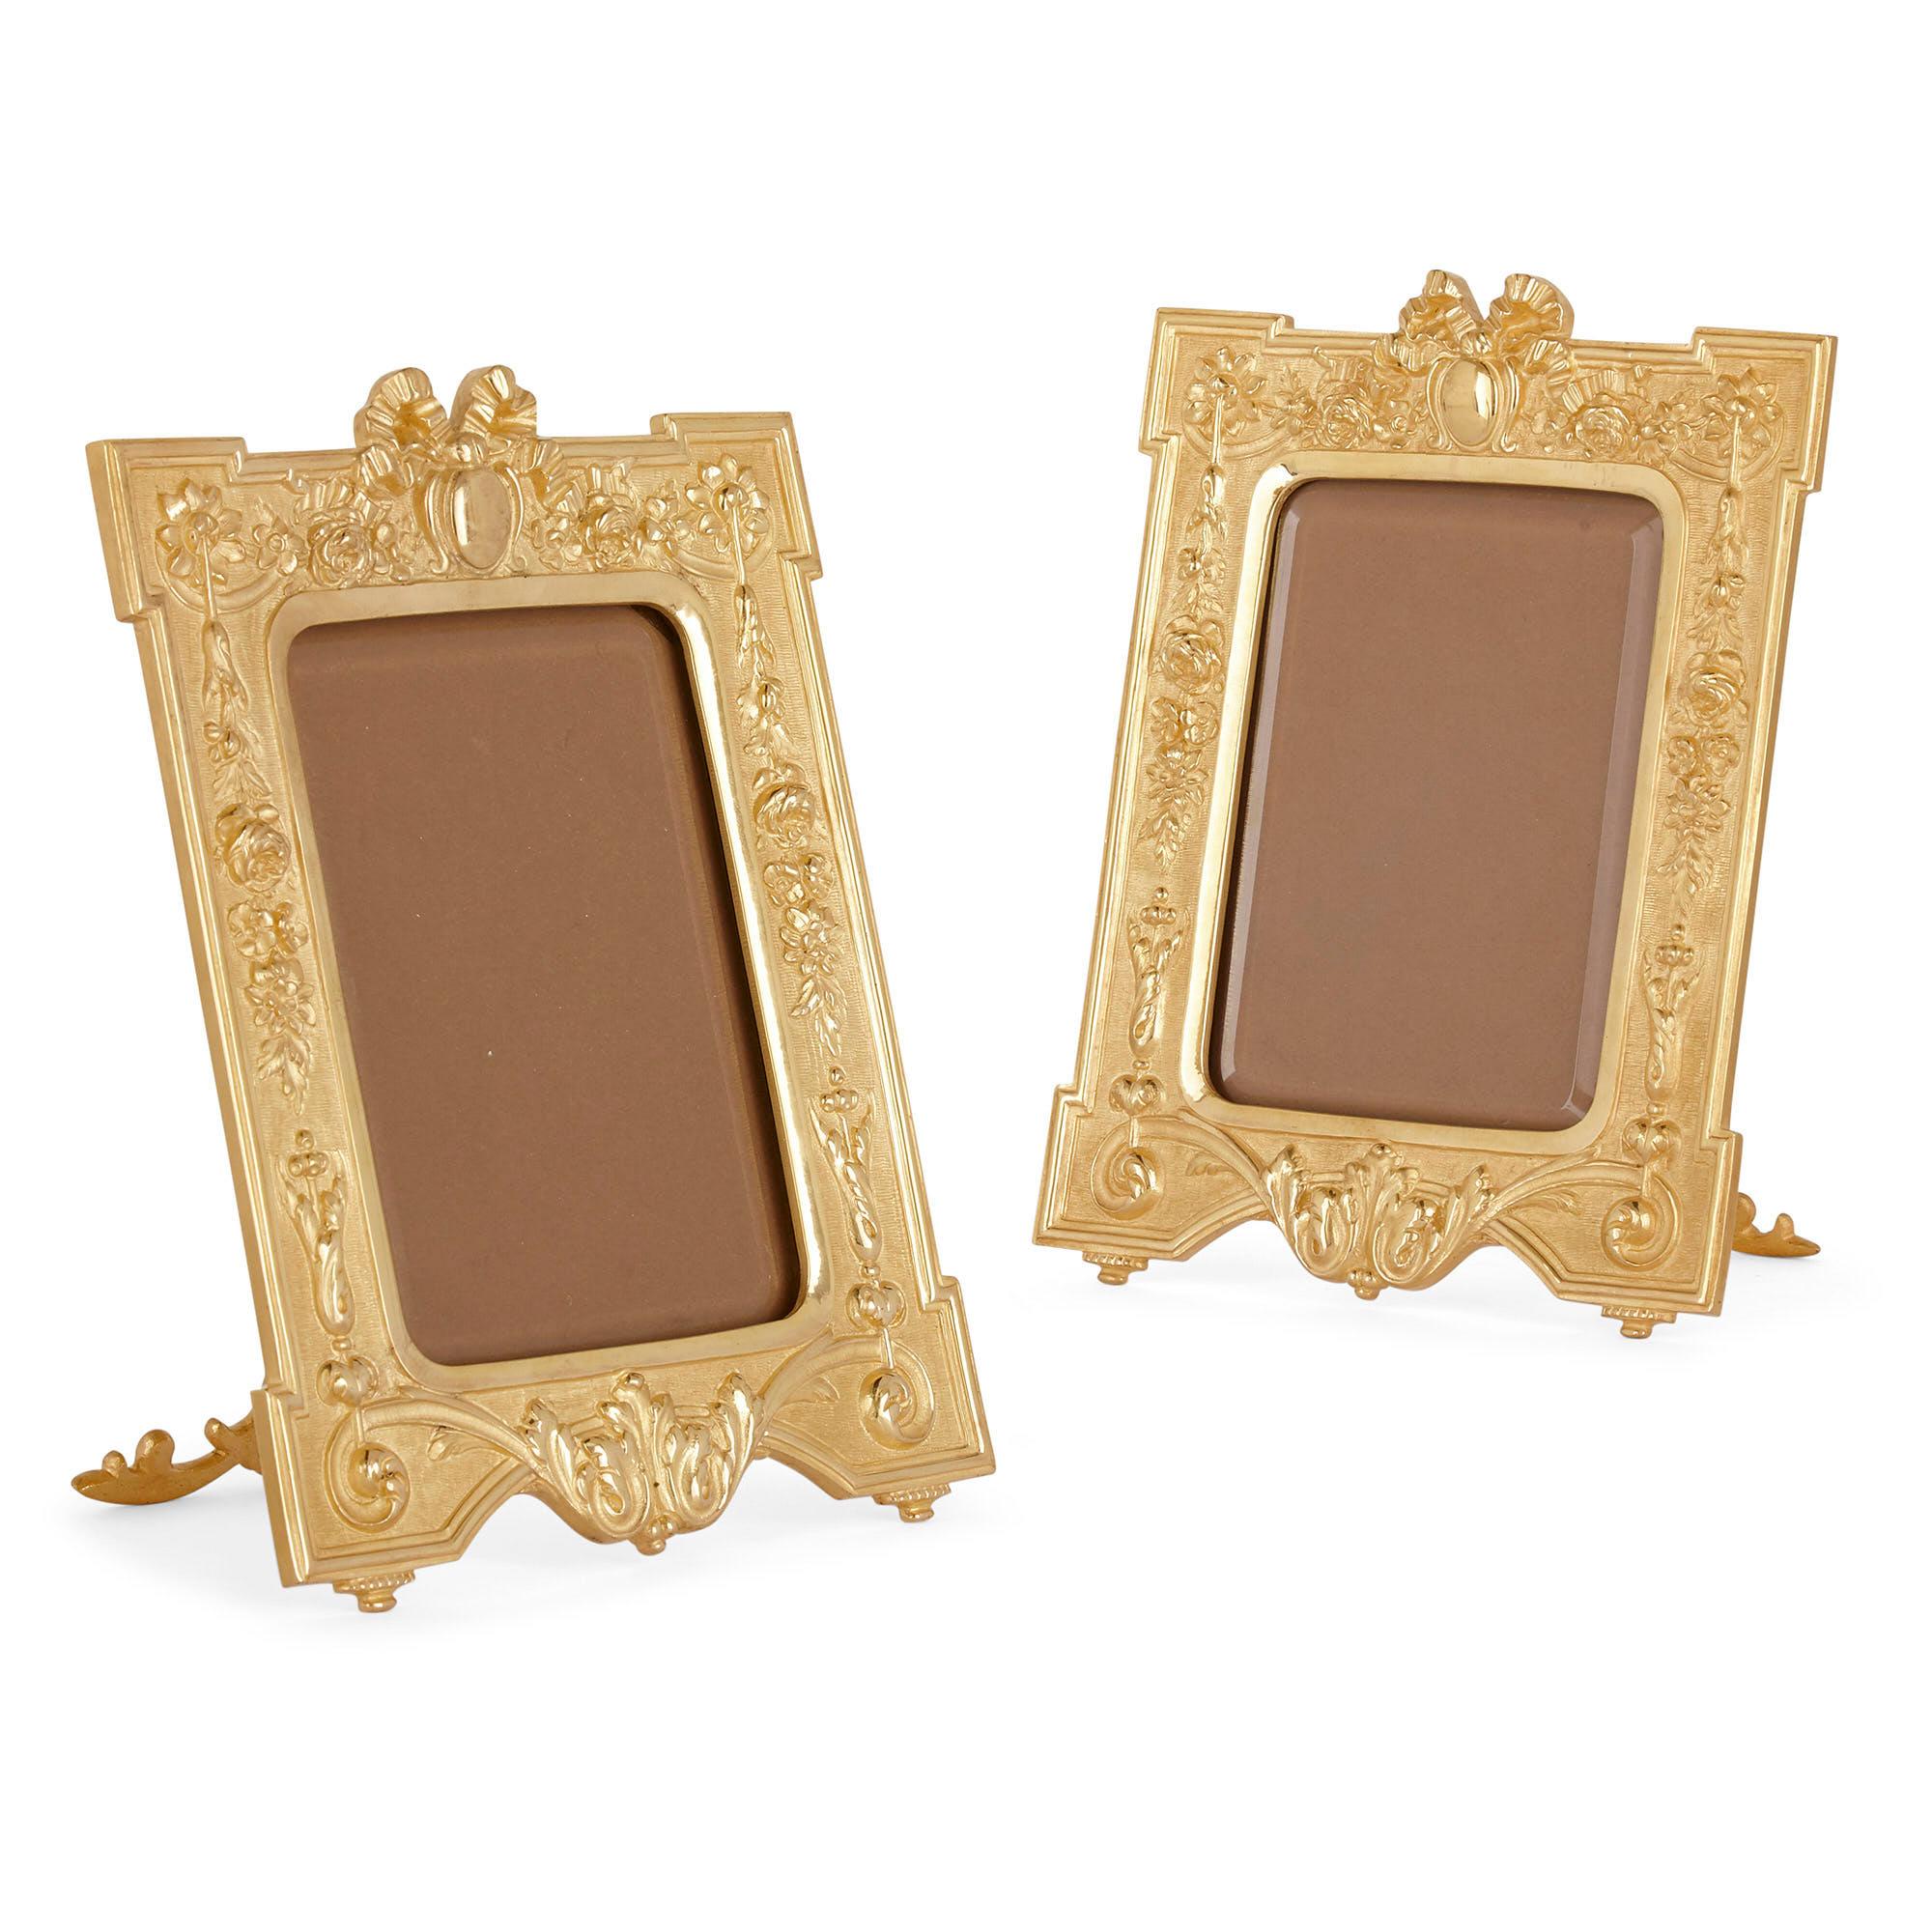 20th Century Pair of French Gilt Bronze Photograph Frames in the Neoclassical Style